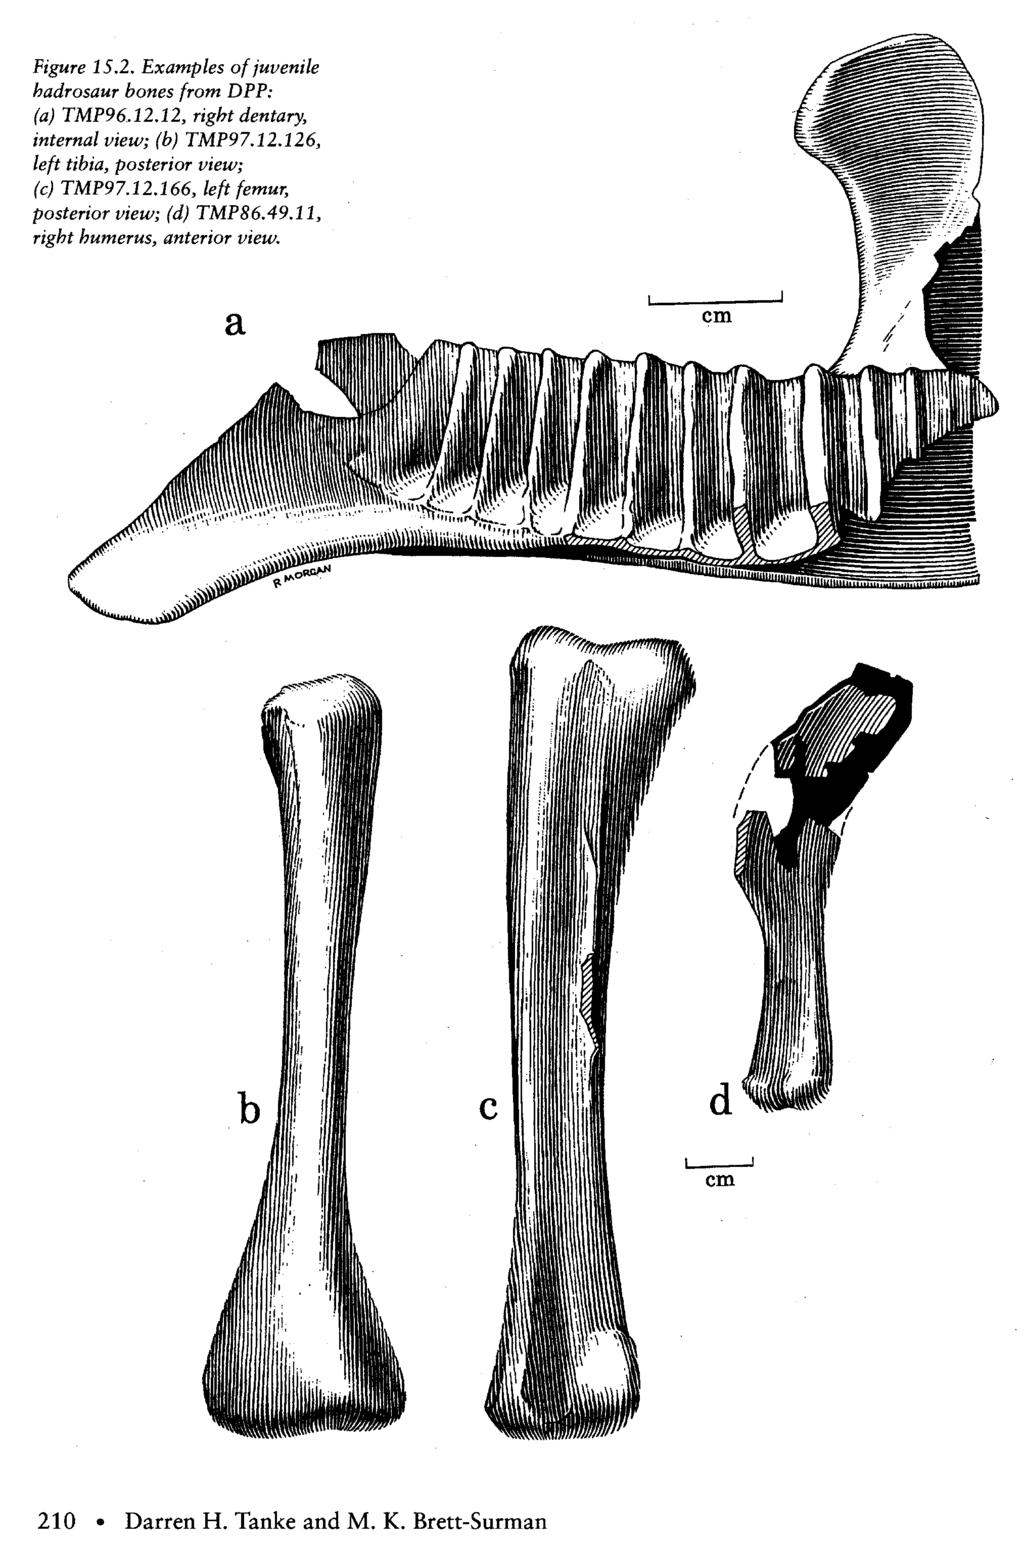 Figure 15.2. Examples of juvenile hadrosaur bones from DPP: (a) TUP96A2.il, right dentary, internal view; (b) TMP97.12.